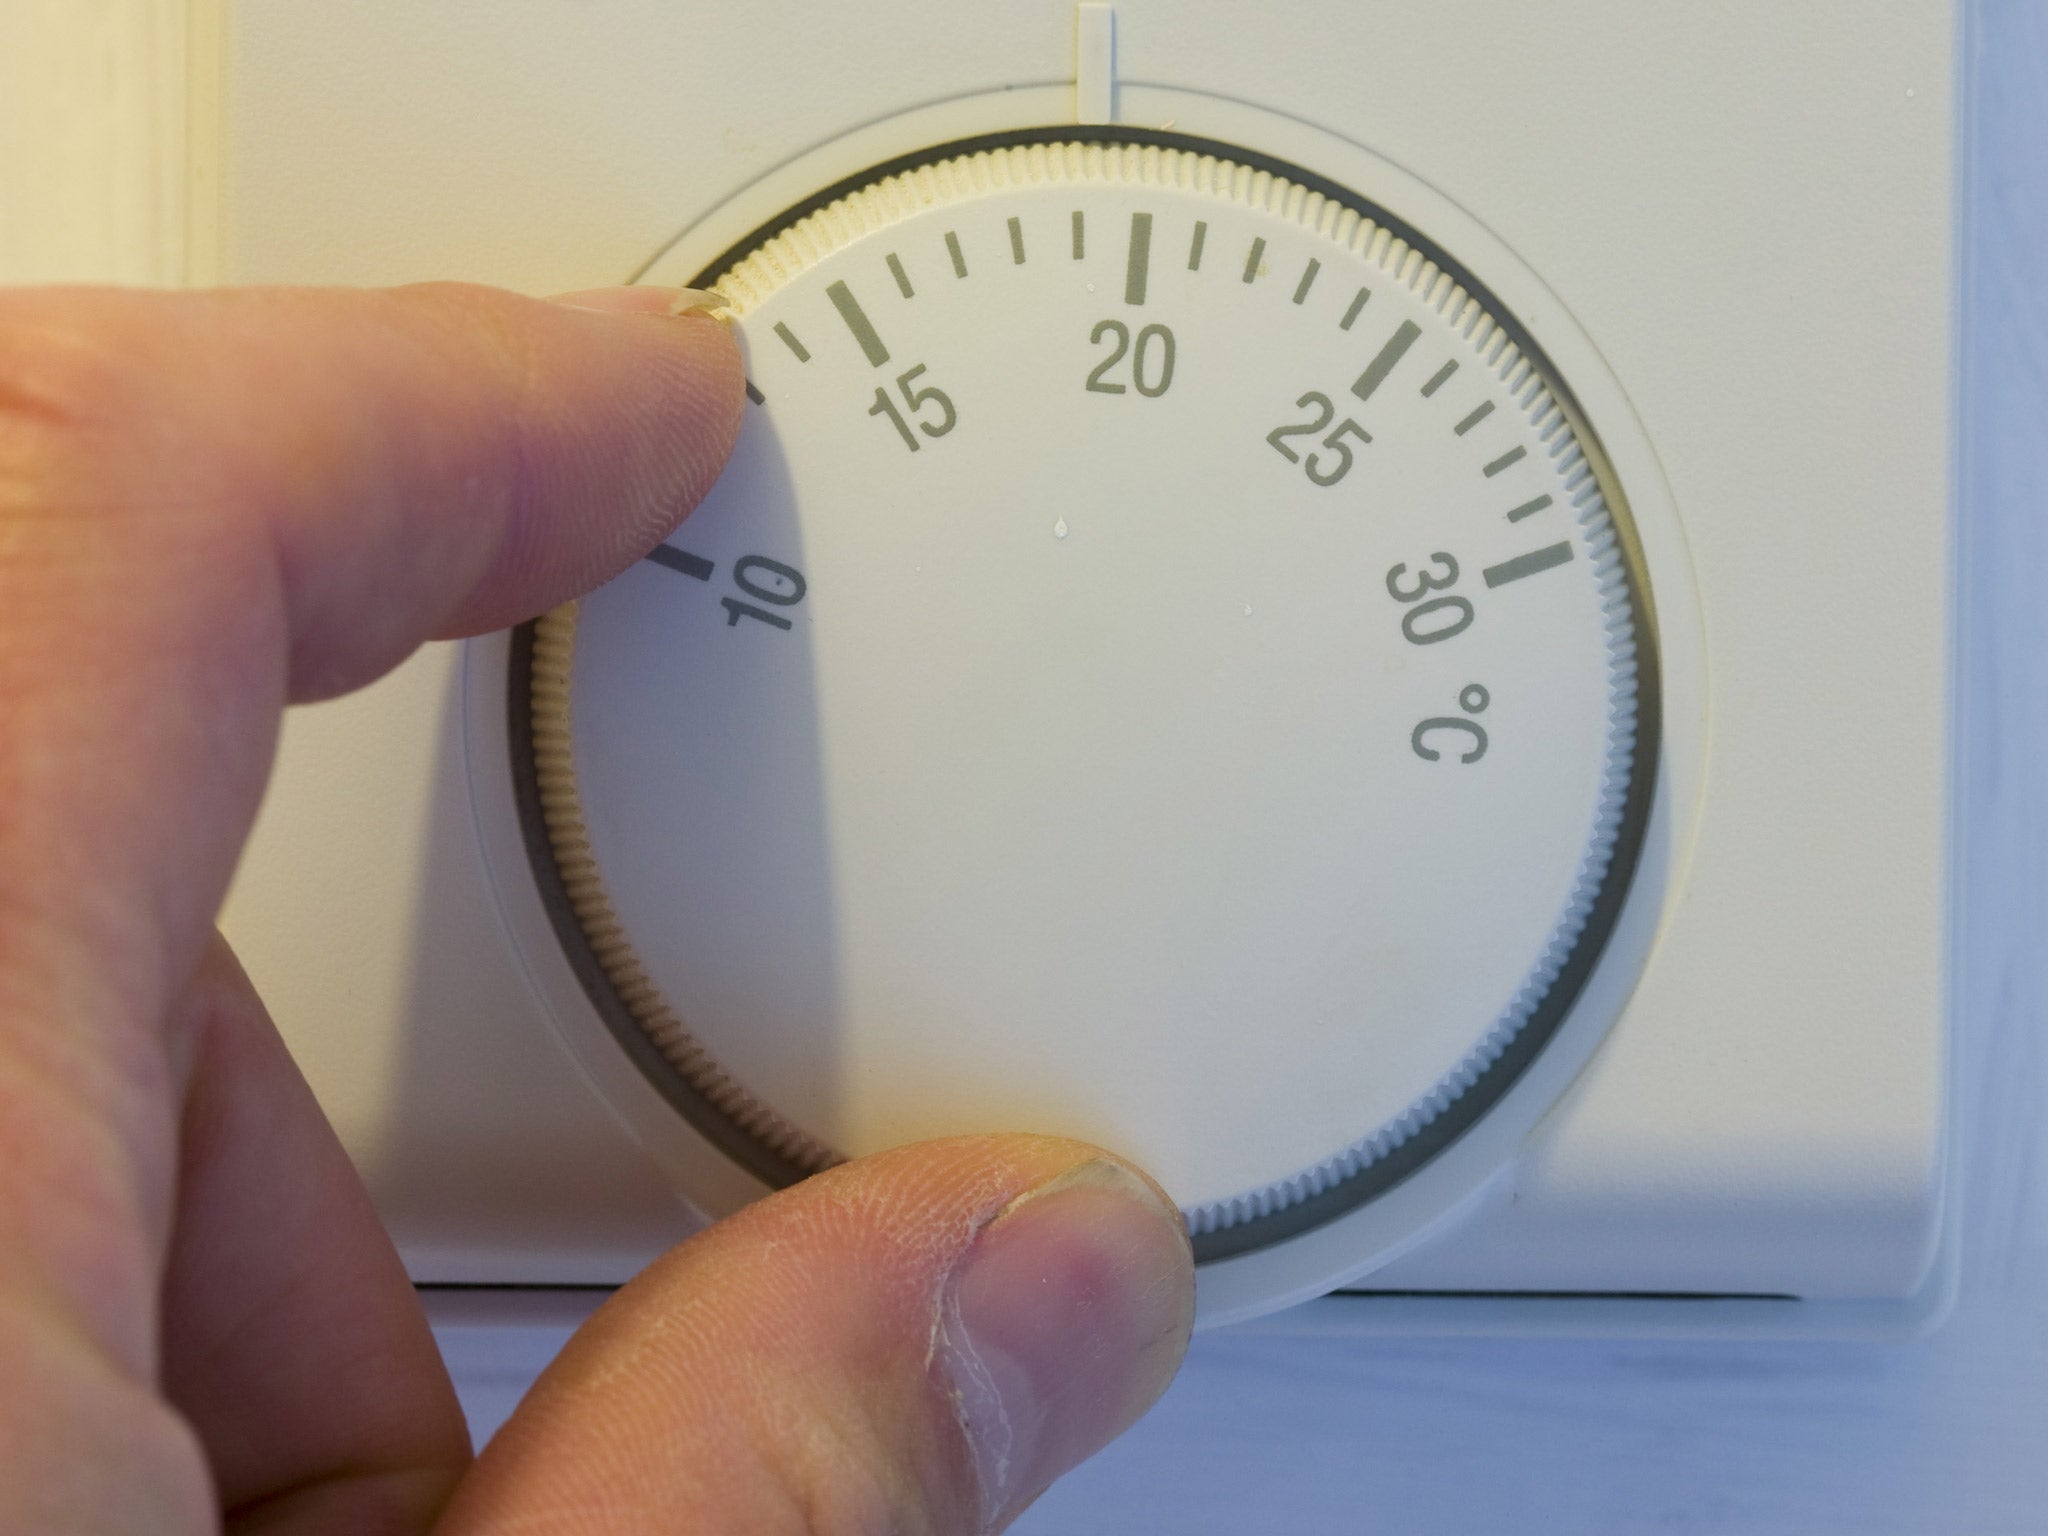 18 per cent of people said they kept their heating on day and night